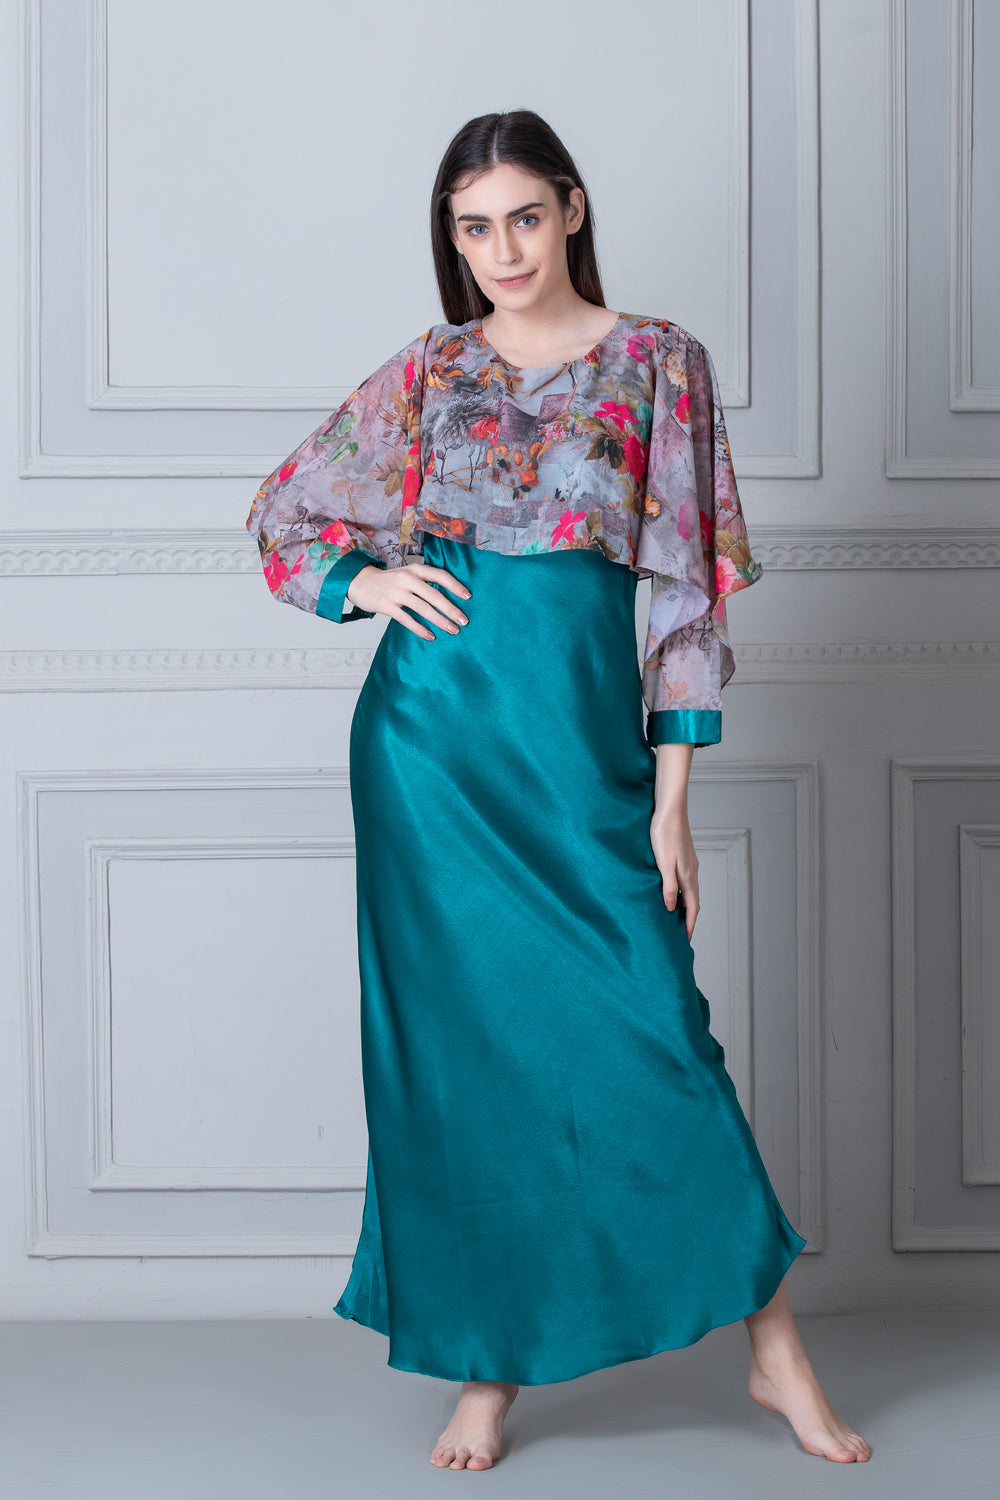 Vibrant Green Satin Nighty with print Cape Private Lives